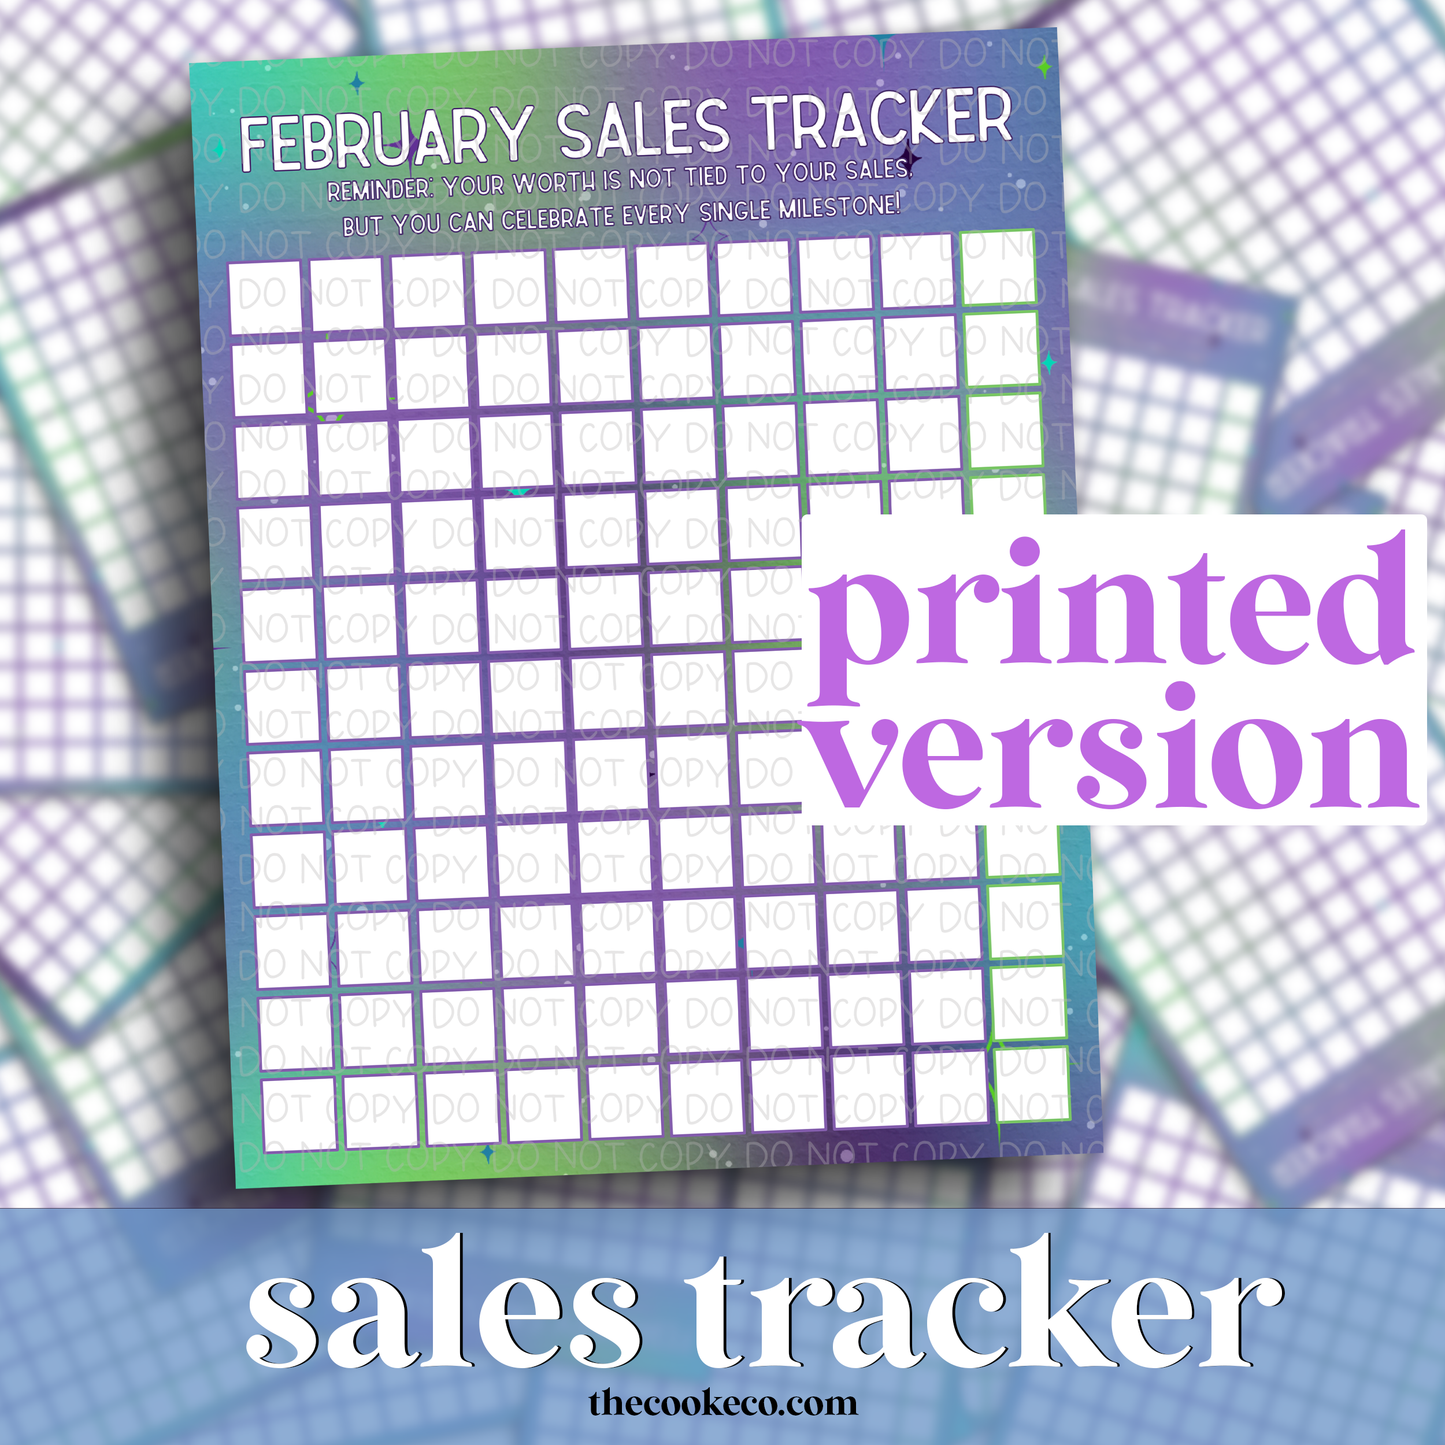 FEBRUARY SALES TRACKER - PRINTED ON CARDSTOCK